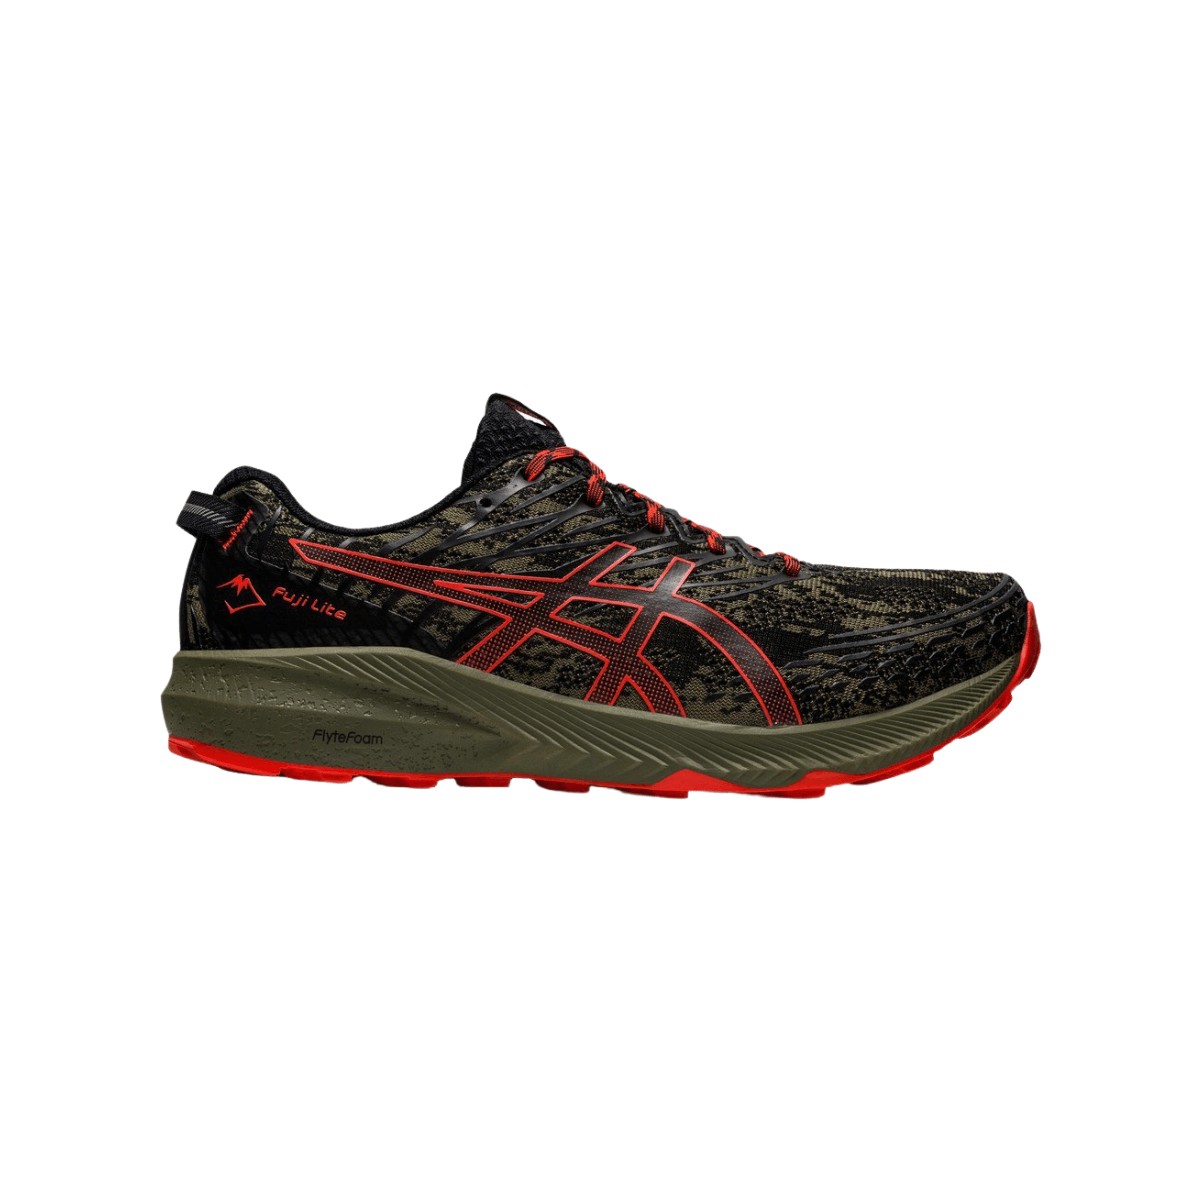 Asics Fuji Lite 3 Vert Rouge AW22 Chaussures, Taille 41,5 - EUR